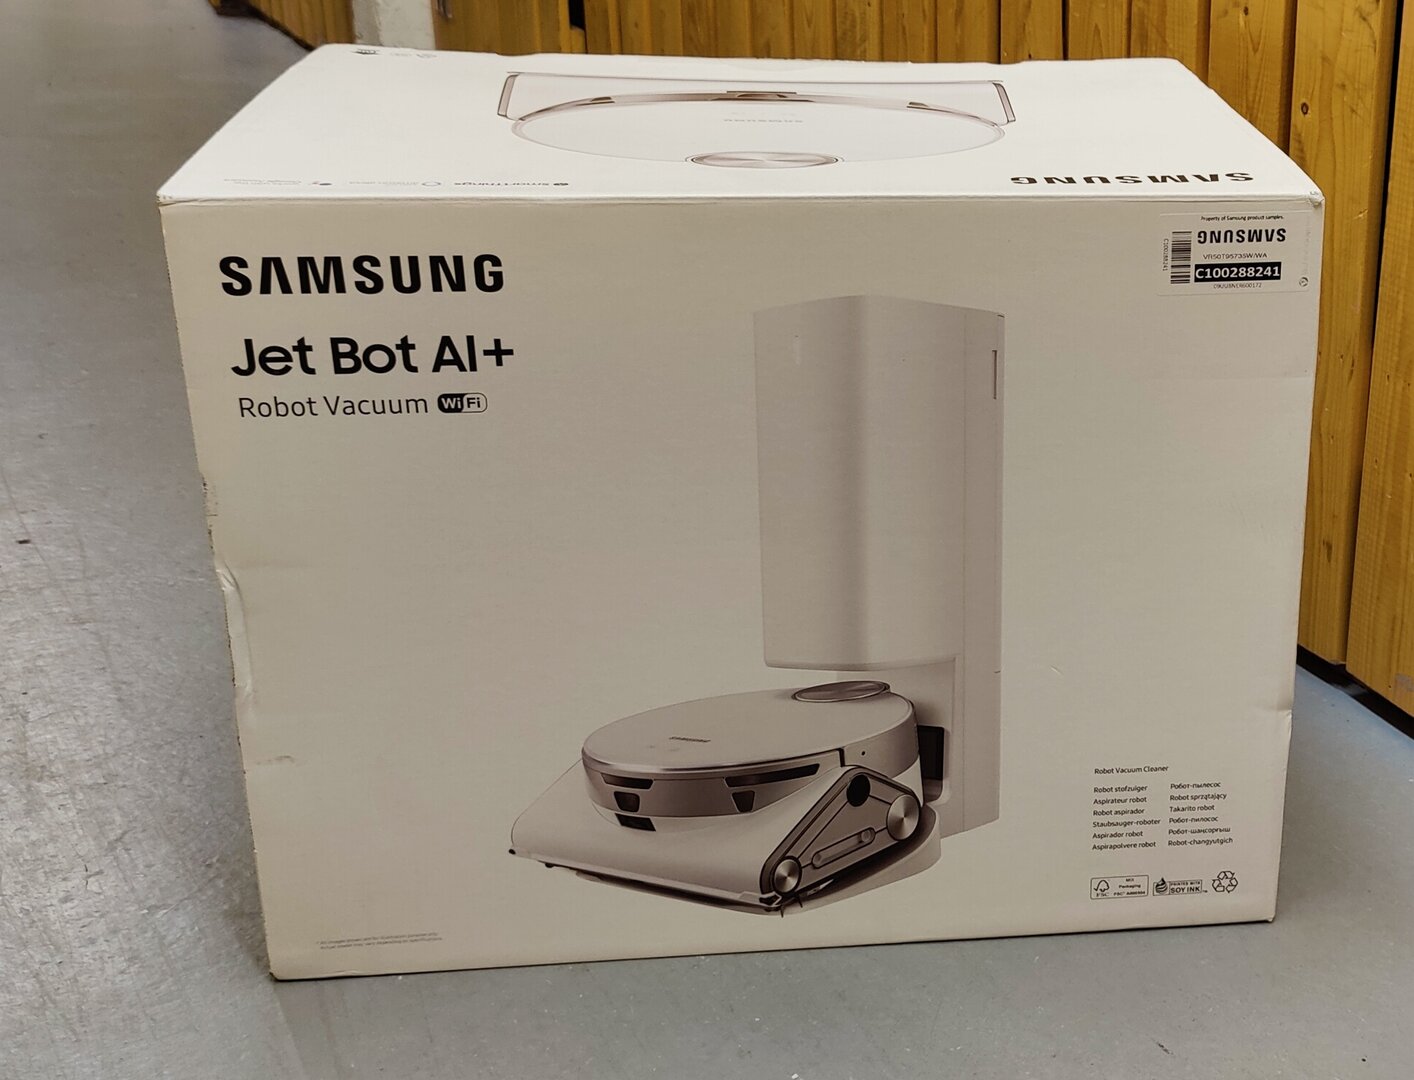 molecuul tuberculose Grillig Review: Samsung Jet Bot 90 AI+ - a high-end robot vacuum cleaner - AfterDawn